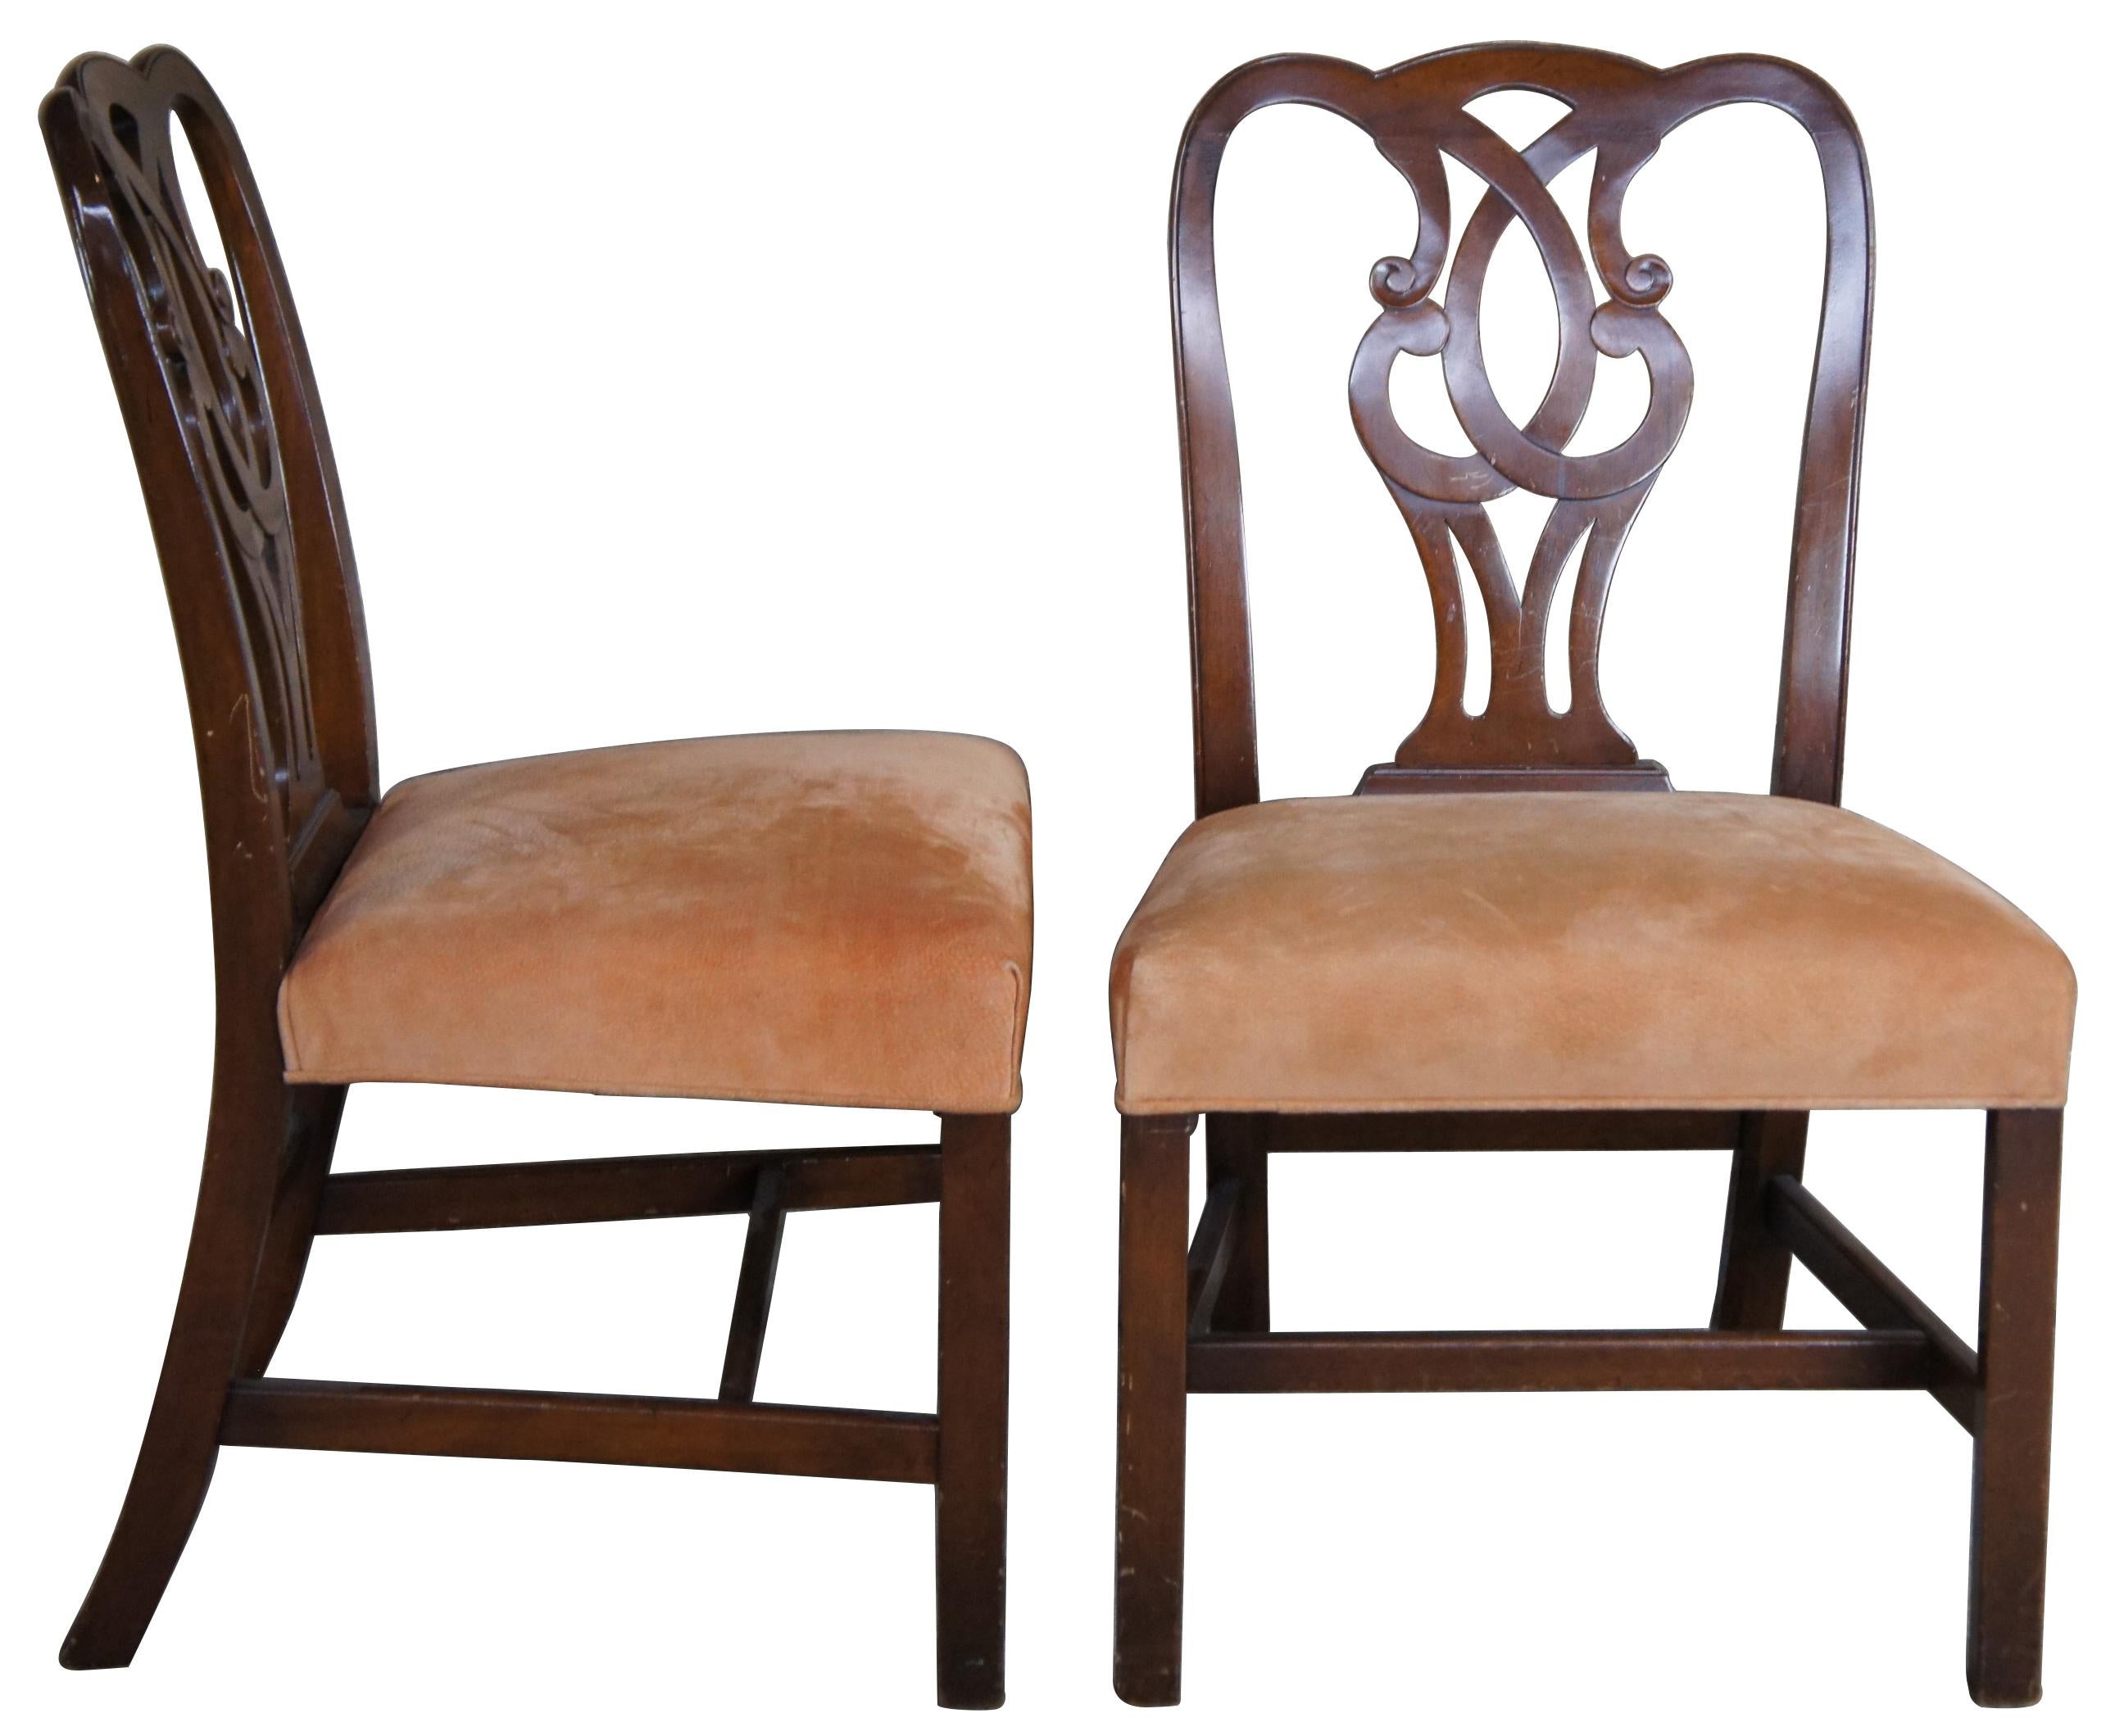 Two antique Chippendale style side chairs. Made of mahogany, featuring a pretzel back and peach uphosltered seat. Measure: 37